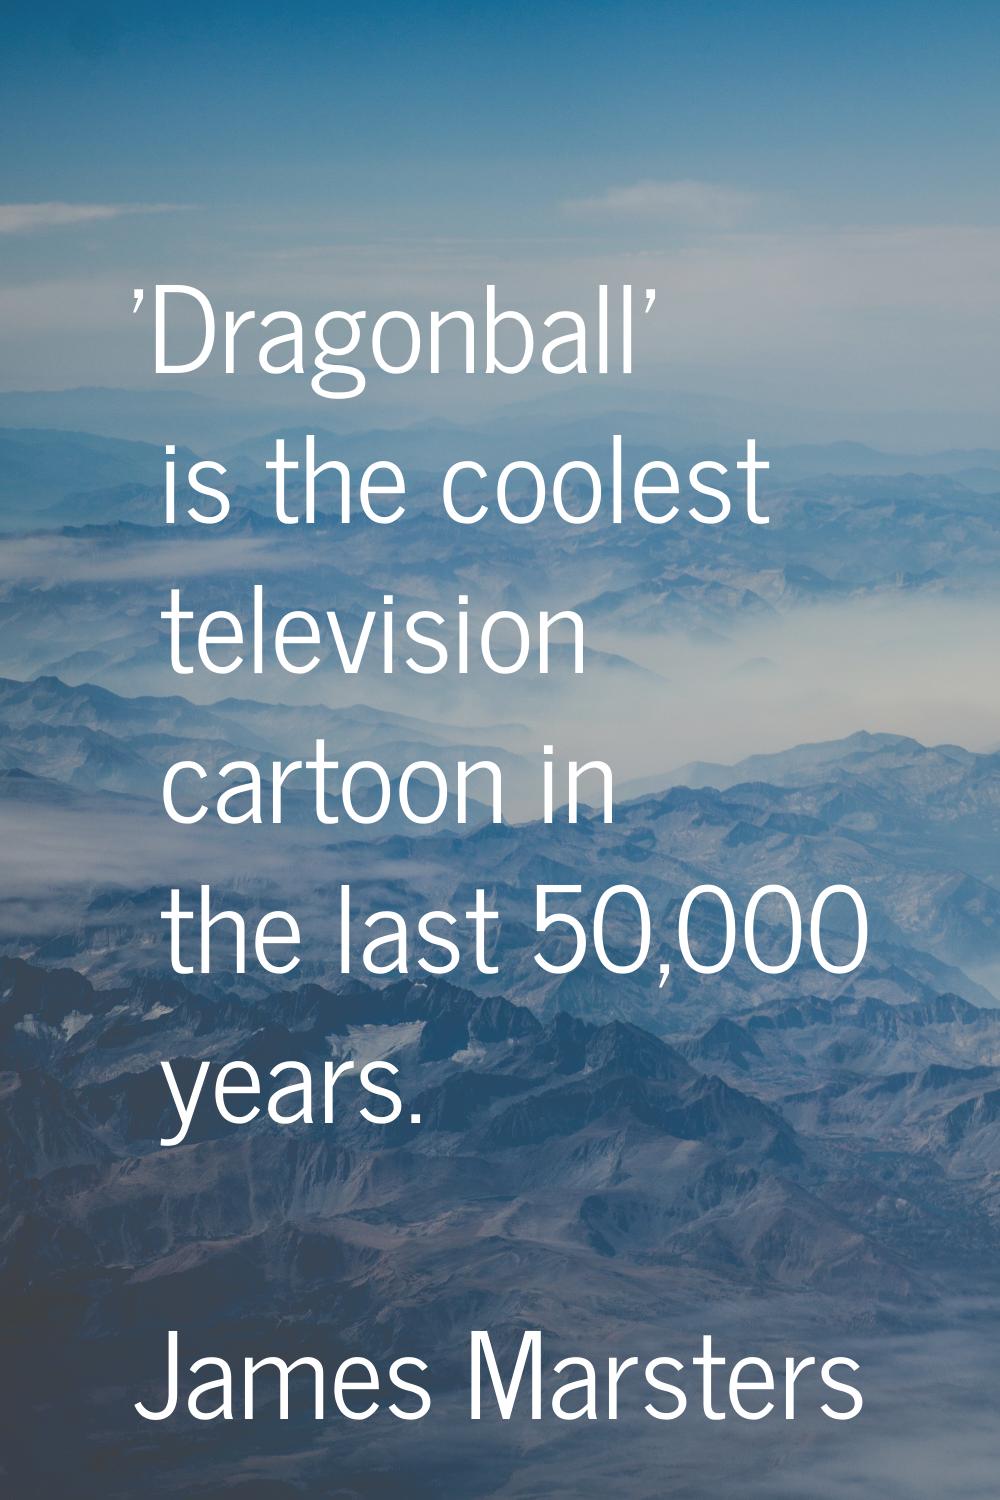 'Dragonball' is the coolest television cartoon in the last 50,000 years.